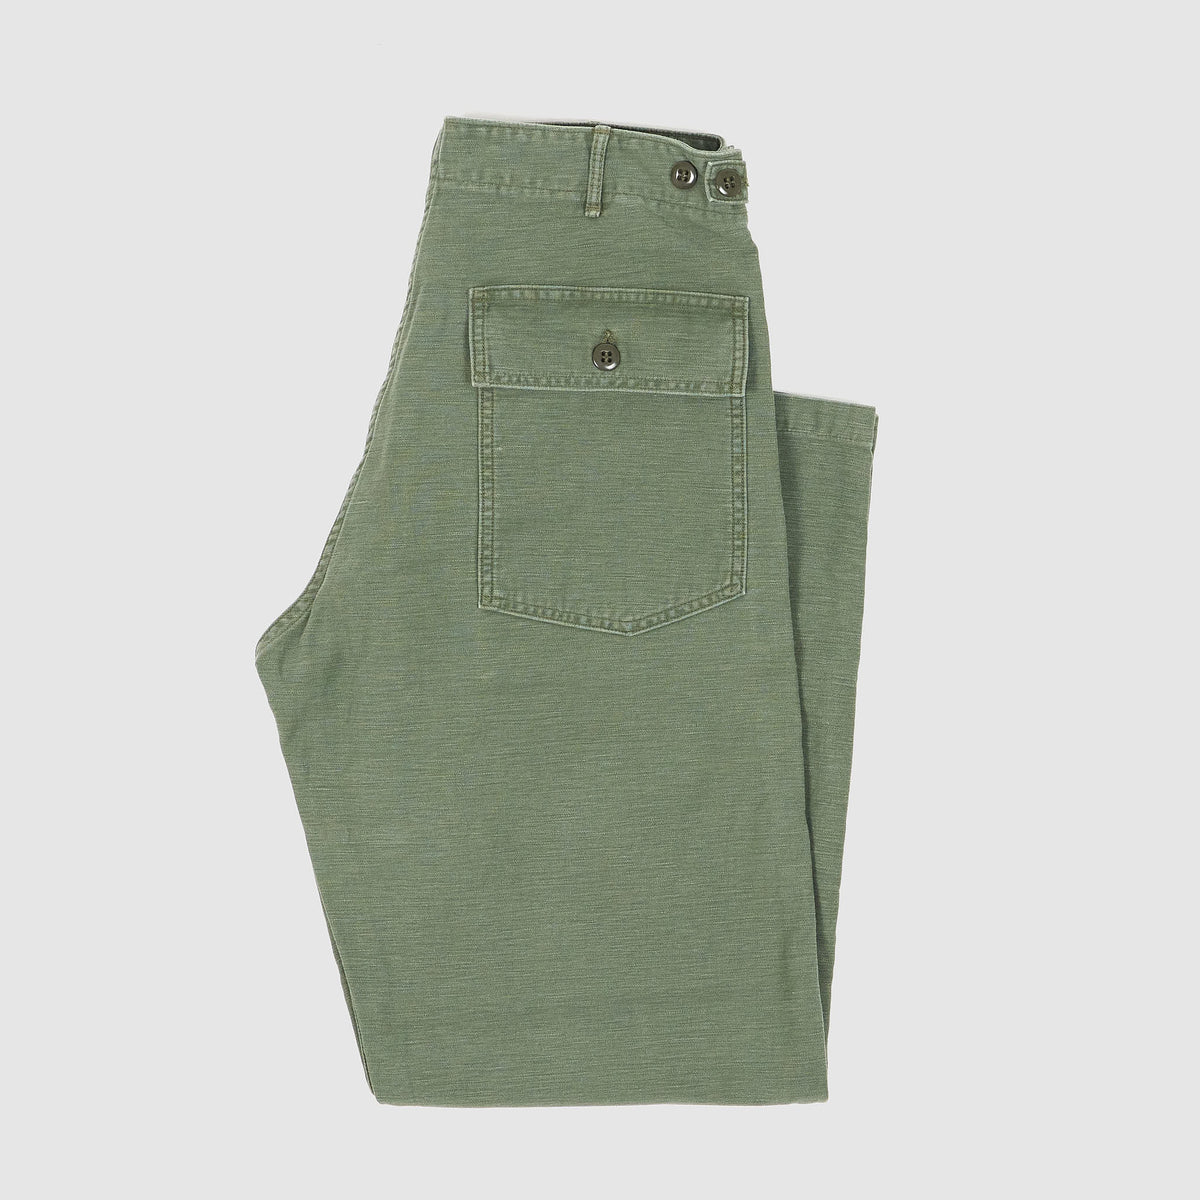 Orslow Military Fatigue Pants Vintage Washed